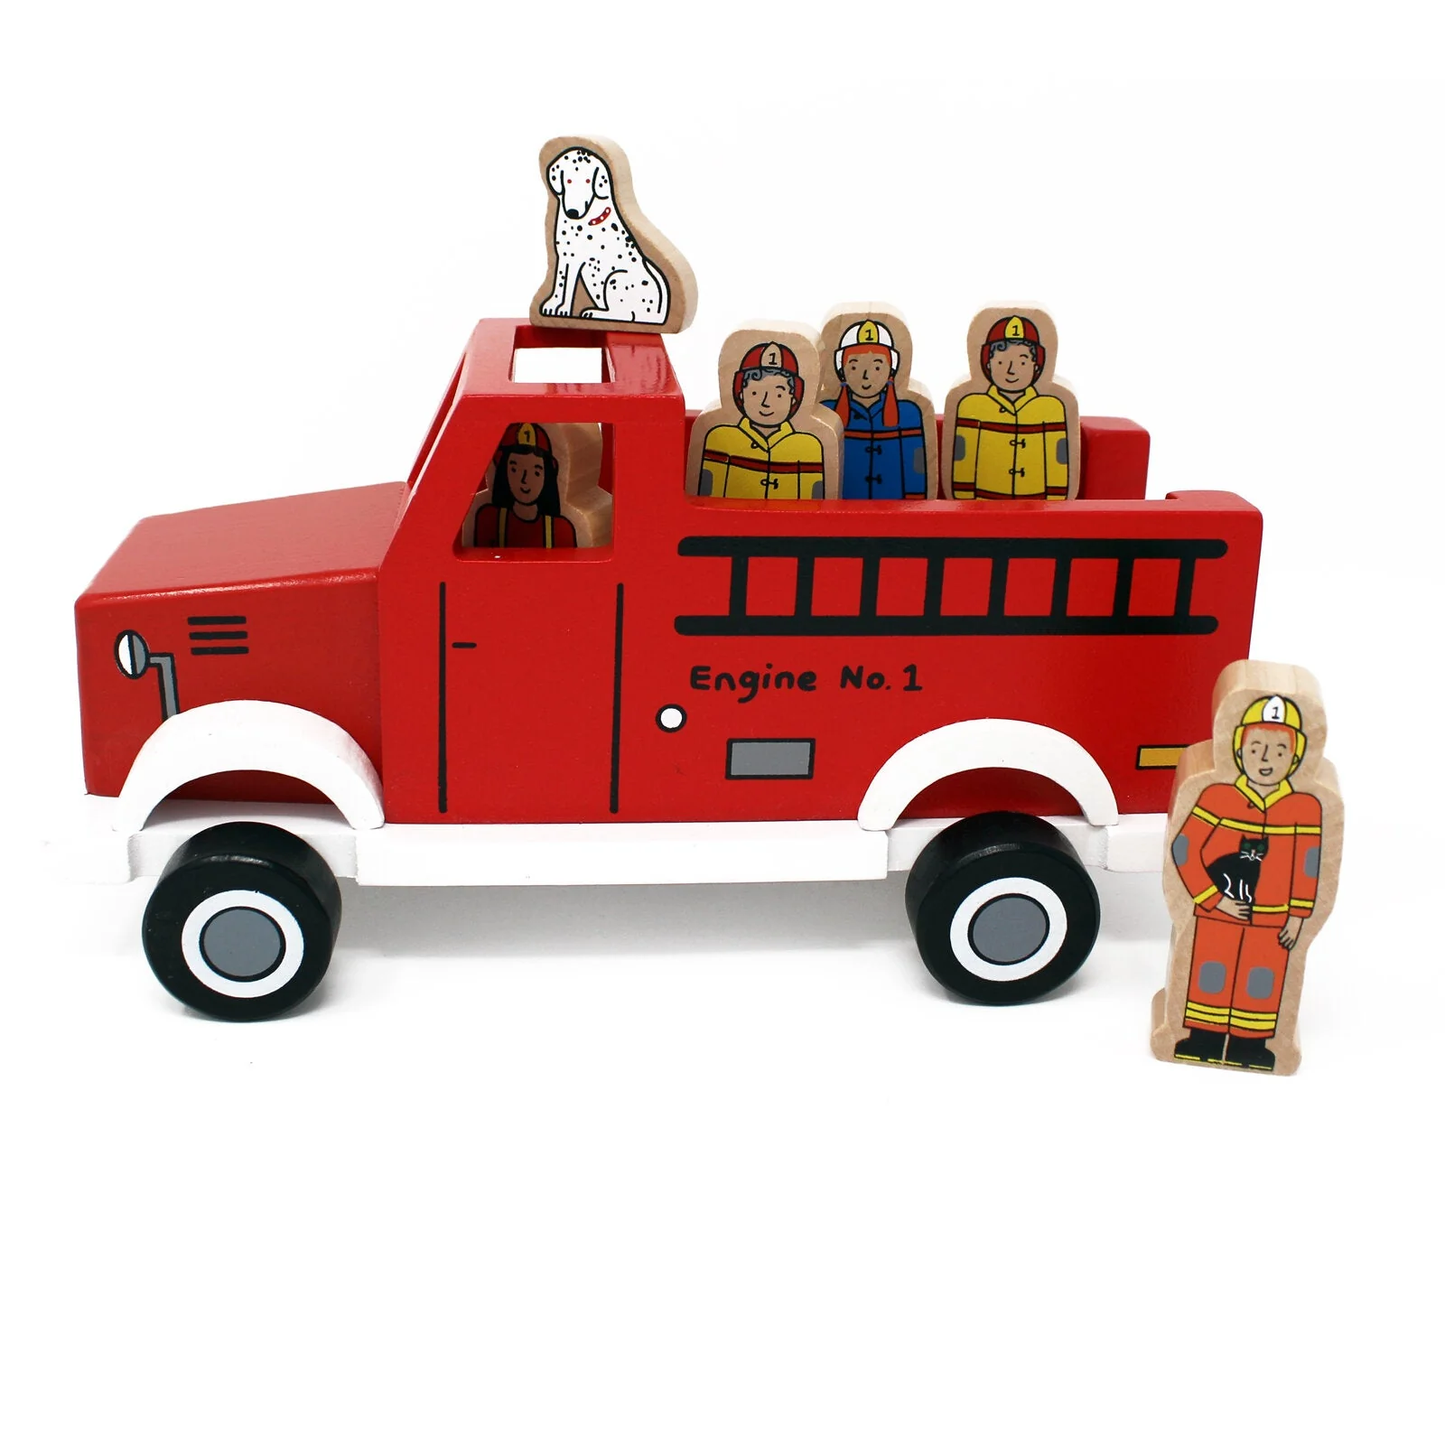 To The Rescue - Magnetic Fire Truck